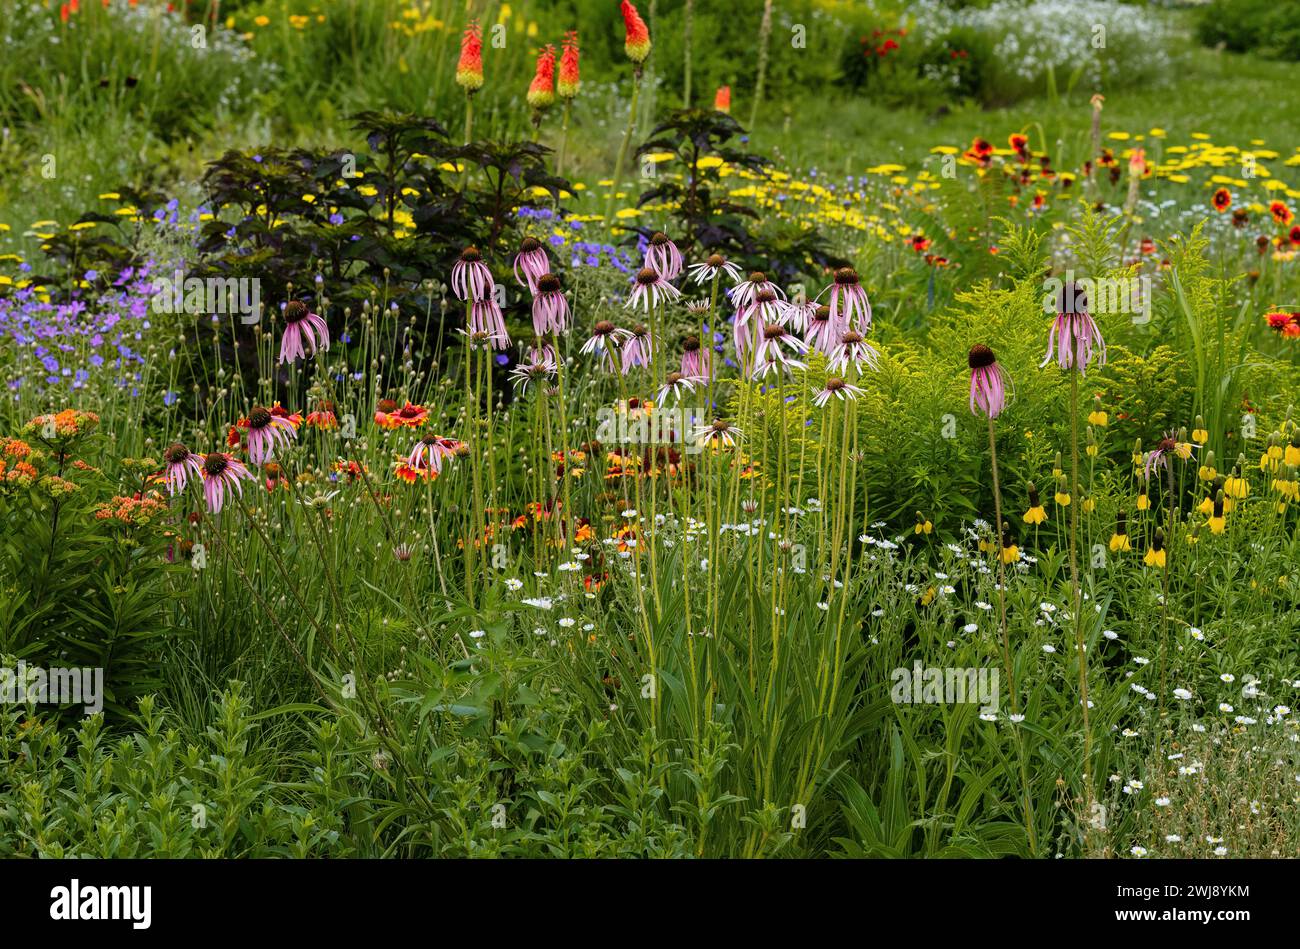 A xeriscape garden with a wide variety of hardy drought tolerant plants, including Echinacea, Coneflower, Gaillardia, Geranium, Poker plants and more. Stock Photo